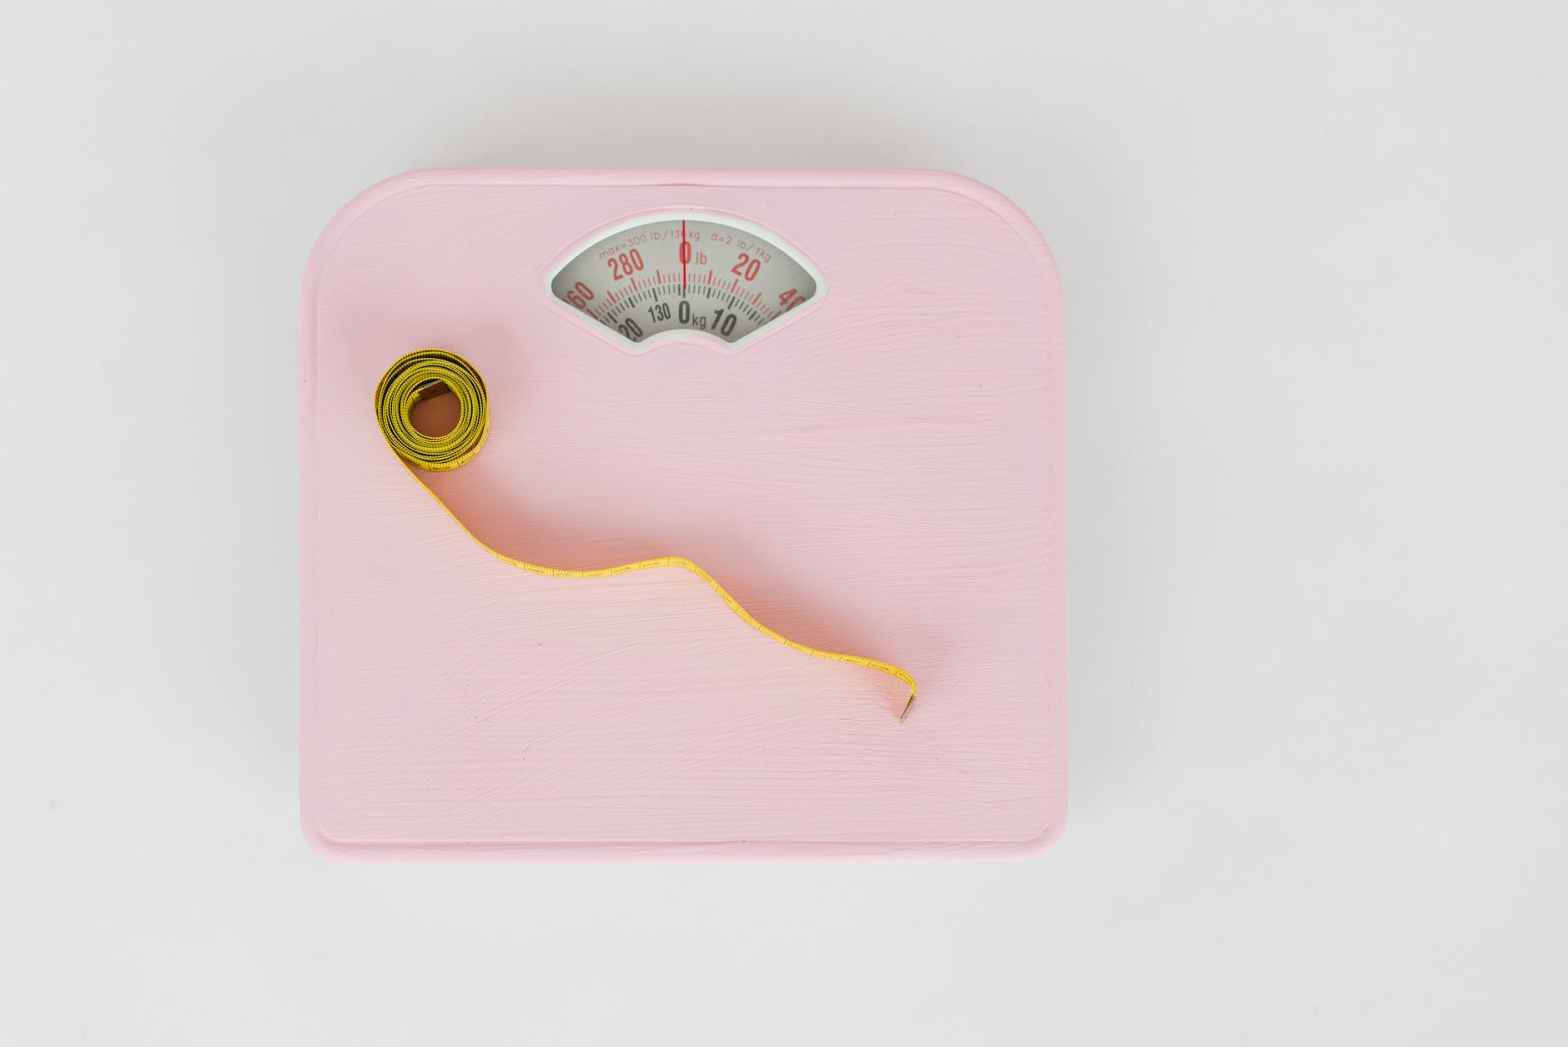 measuring tape on a weighing scale